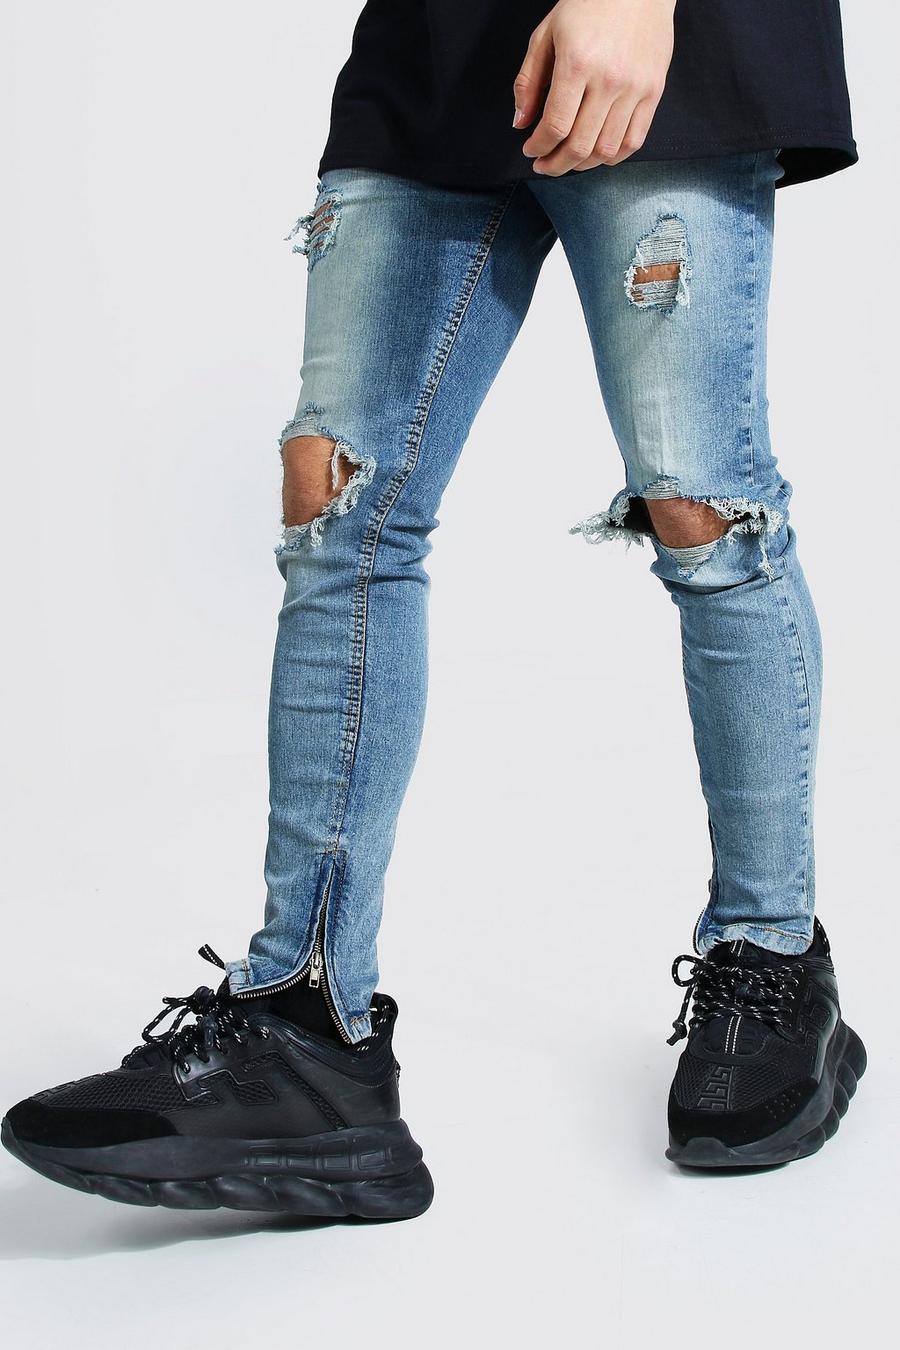 Herren Kleidung Jeans Ripped Jeans Jeans 